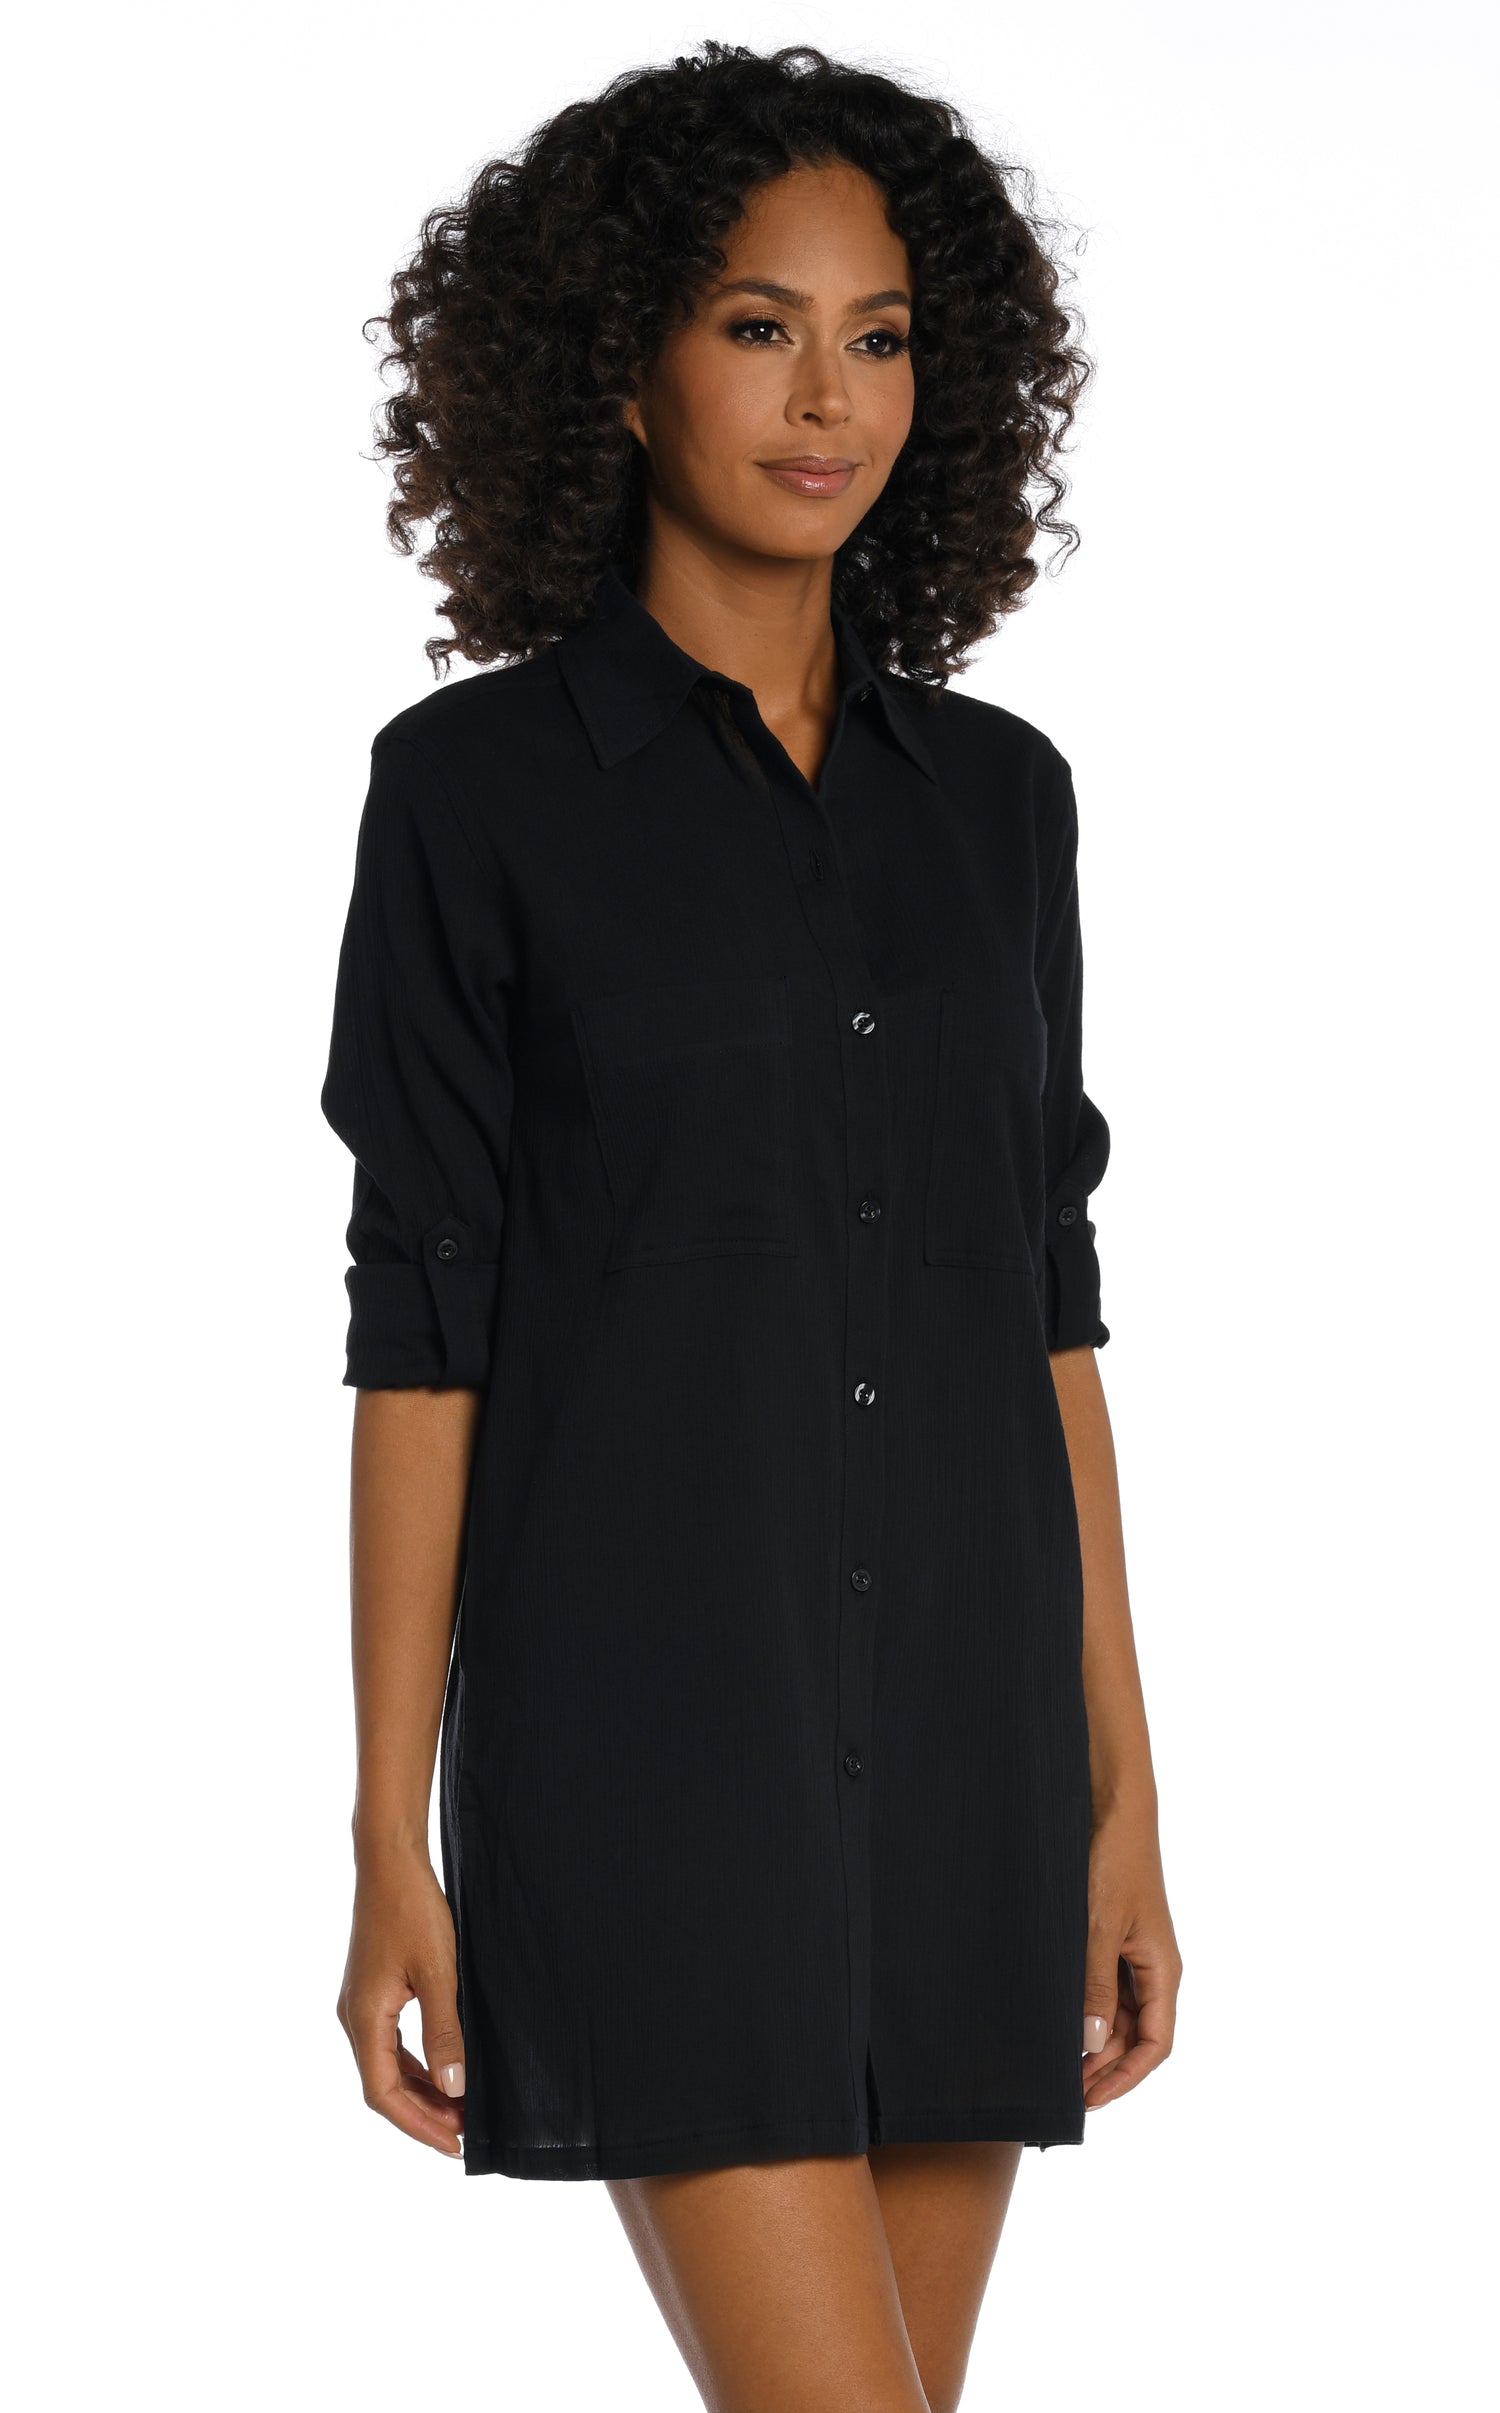 Model is wearing a black button shirt swimsuit cover up from our Island Fare collection.